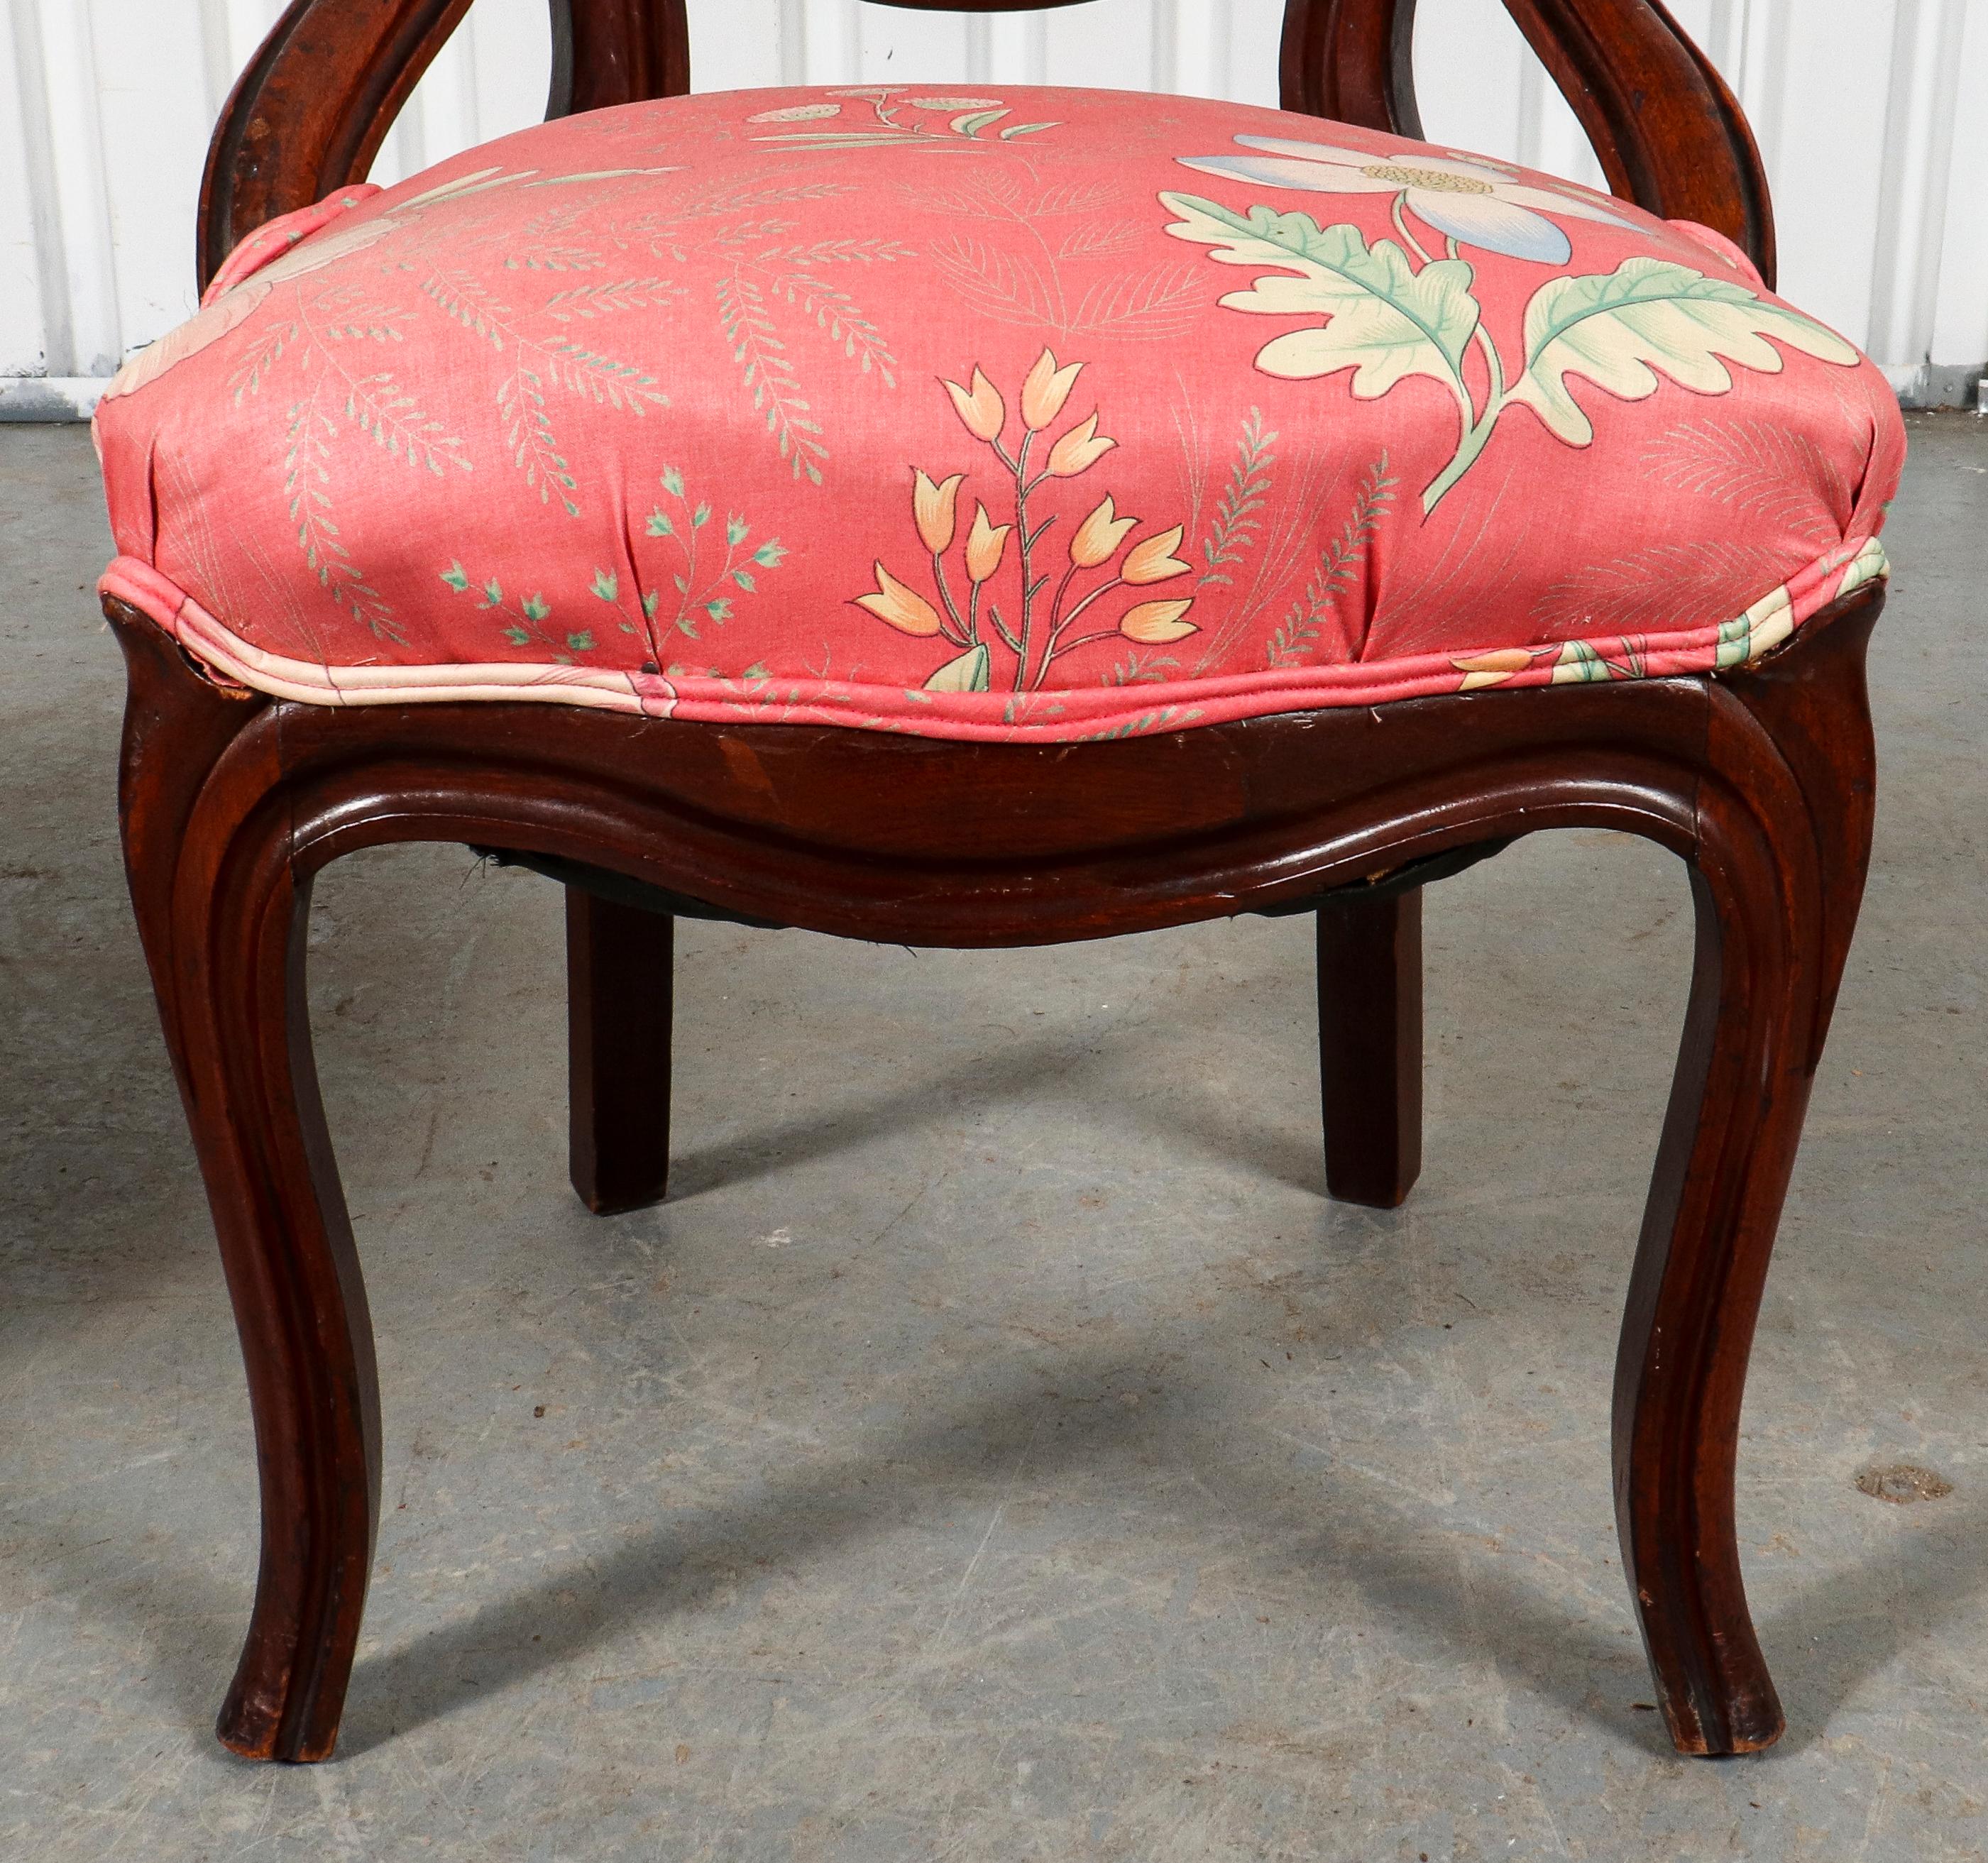 American Rococo Revival Style Wooden Chairs For Sale 5